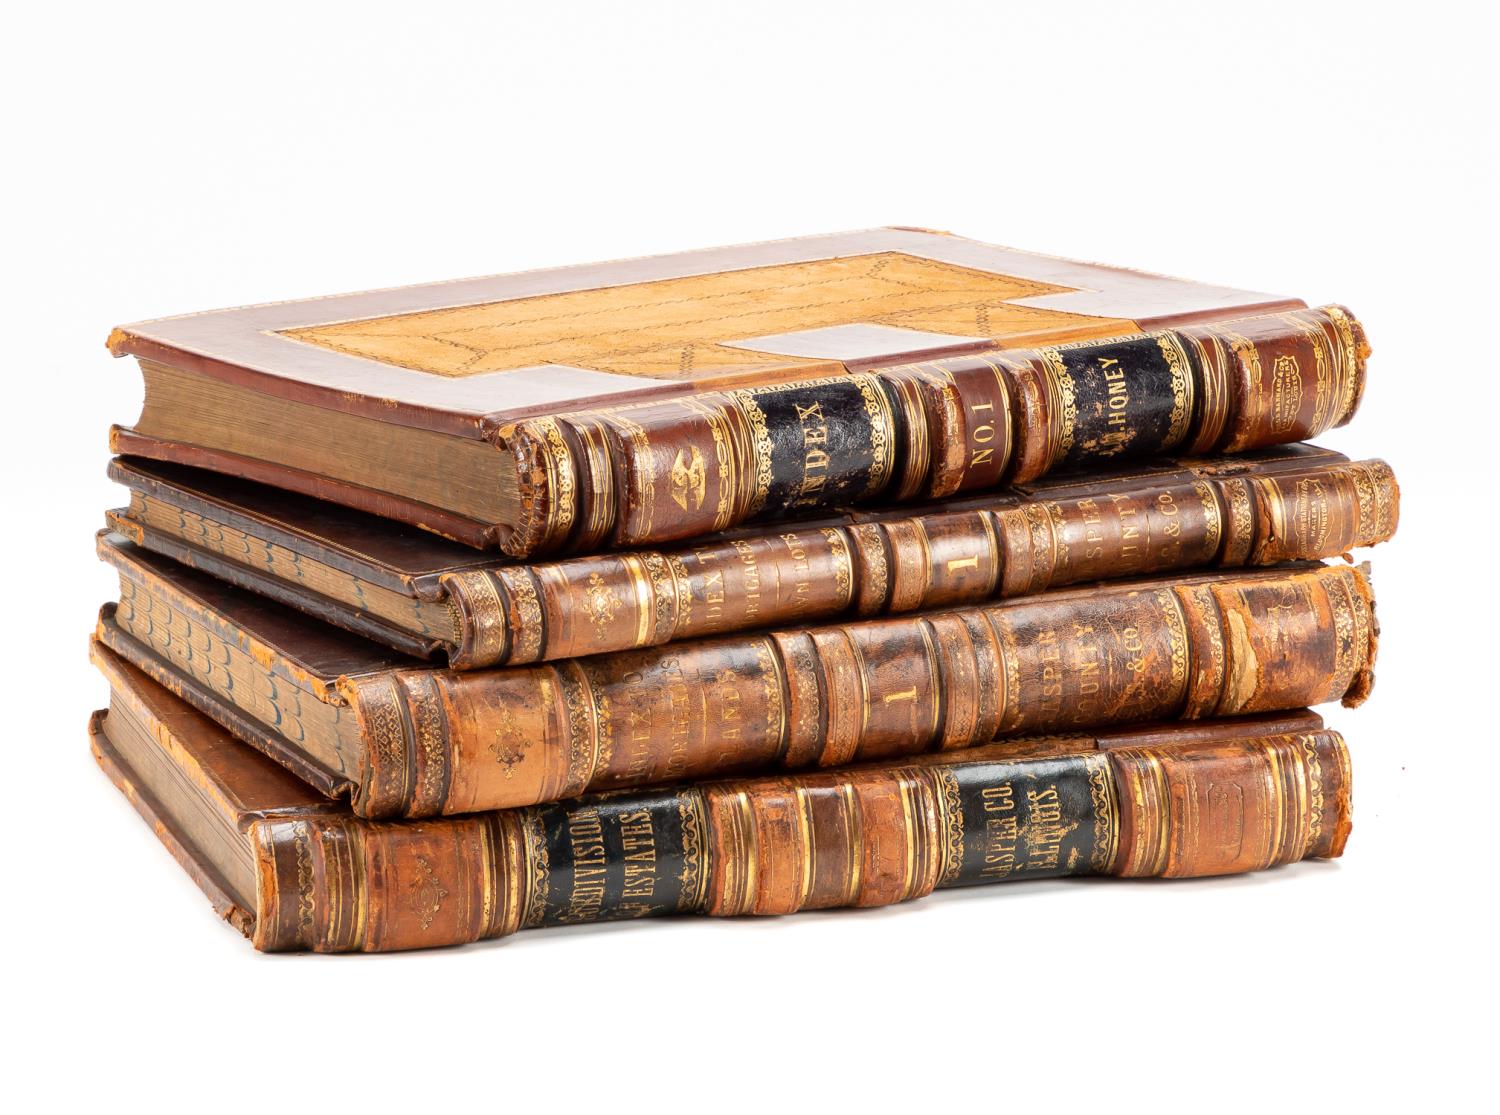 GROUP OF FOUR BOOKS, LEATHERBOUND